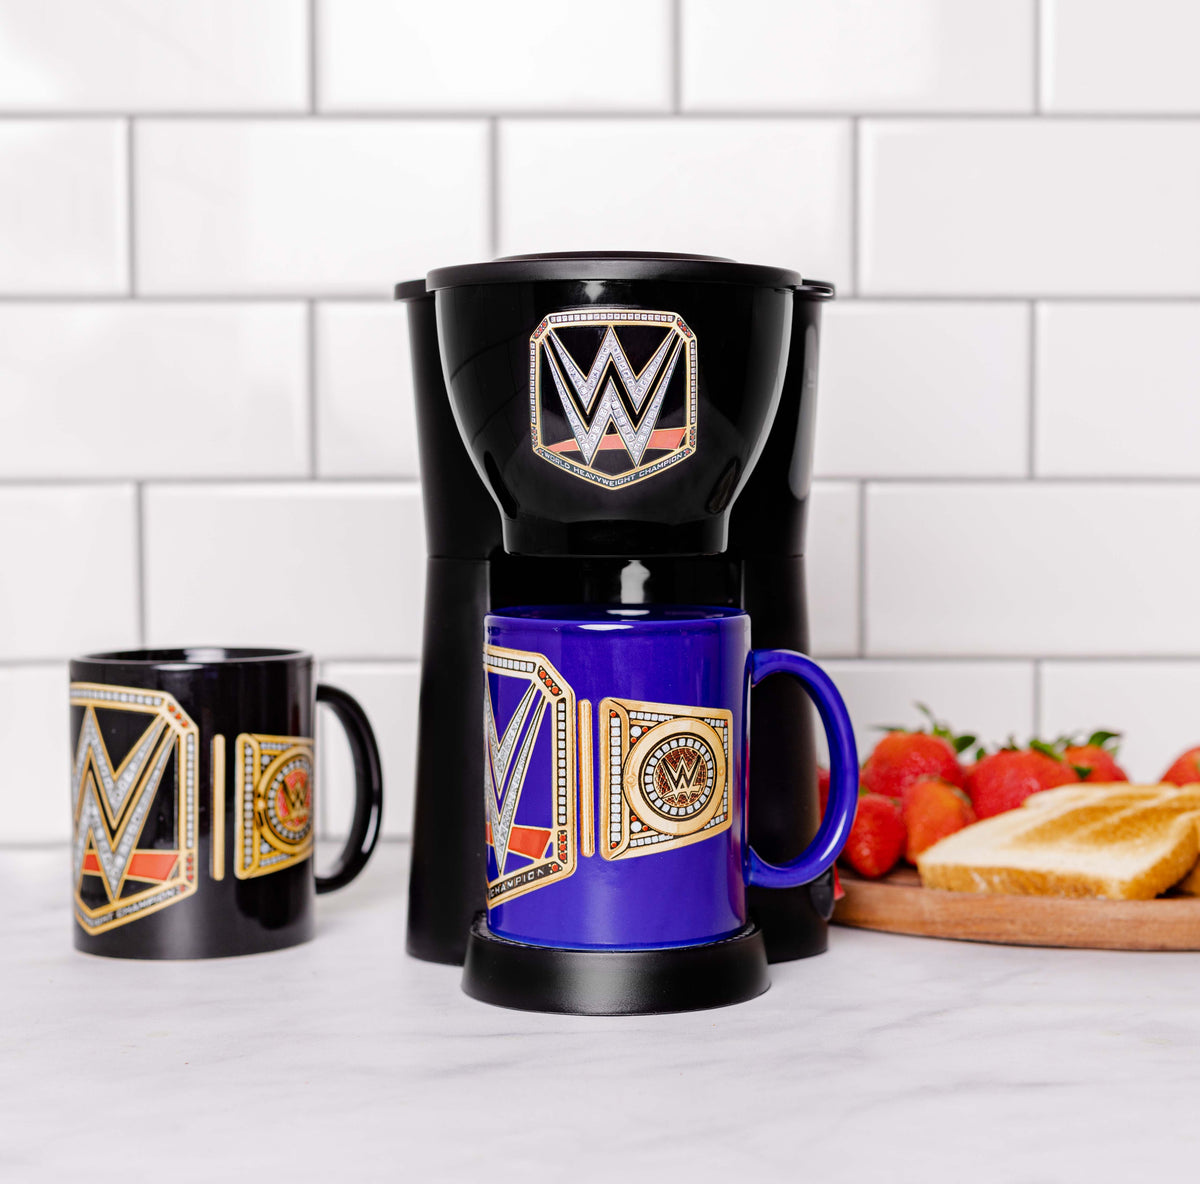 Uncanny Brands WWE Single Cup Coffee Maker Gift Set with 2 Mugs